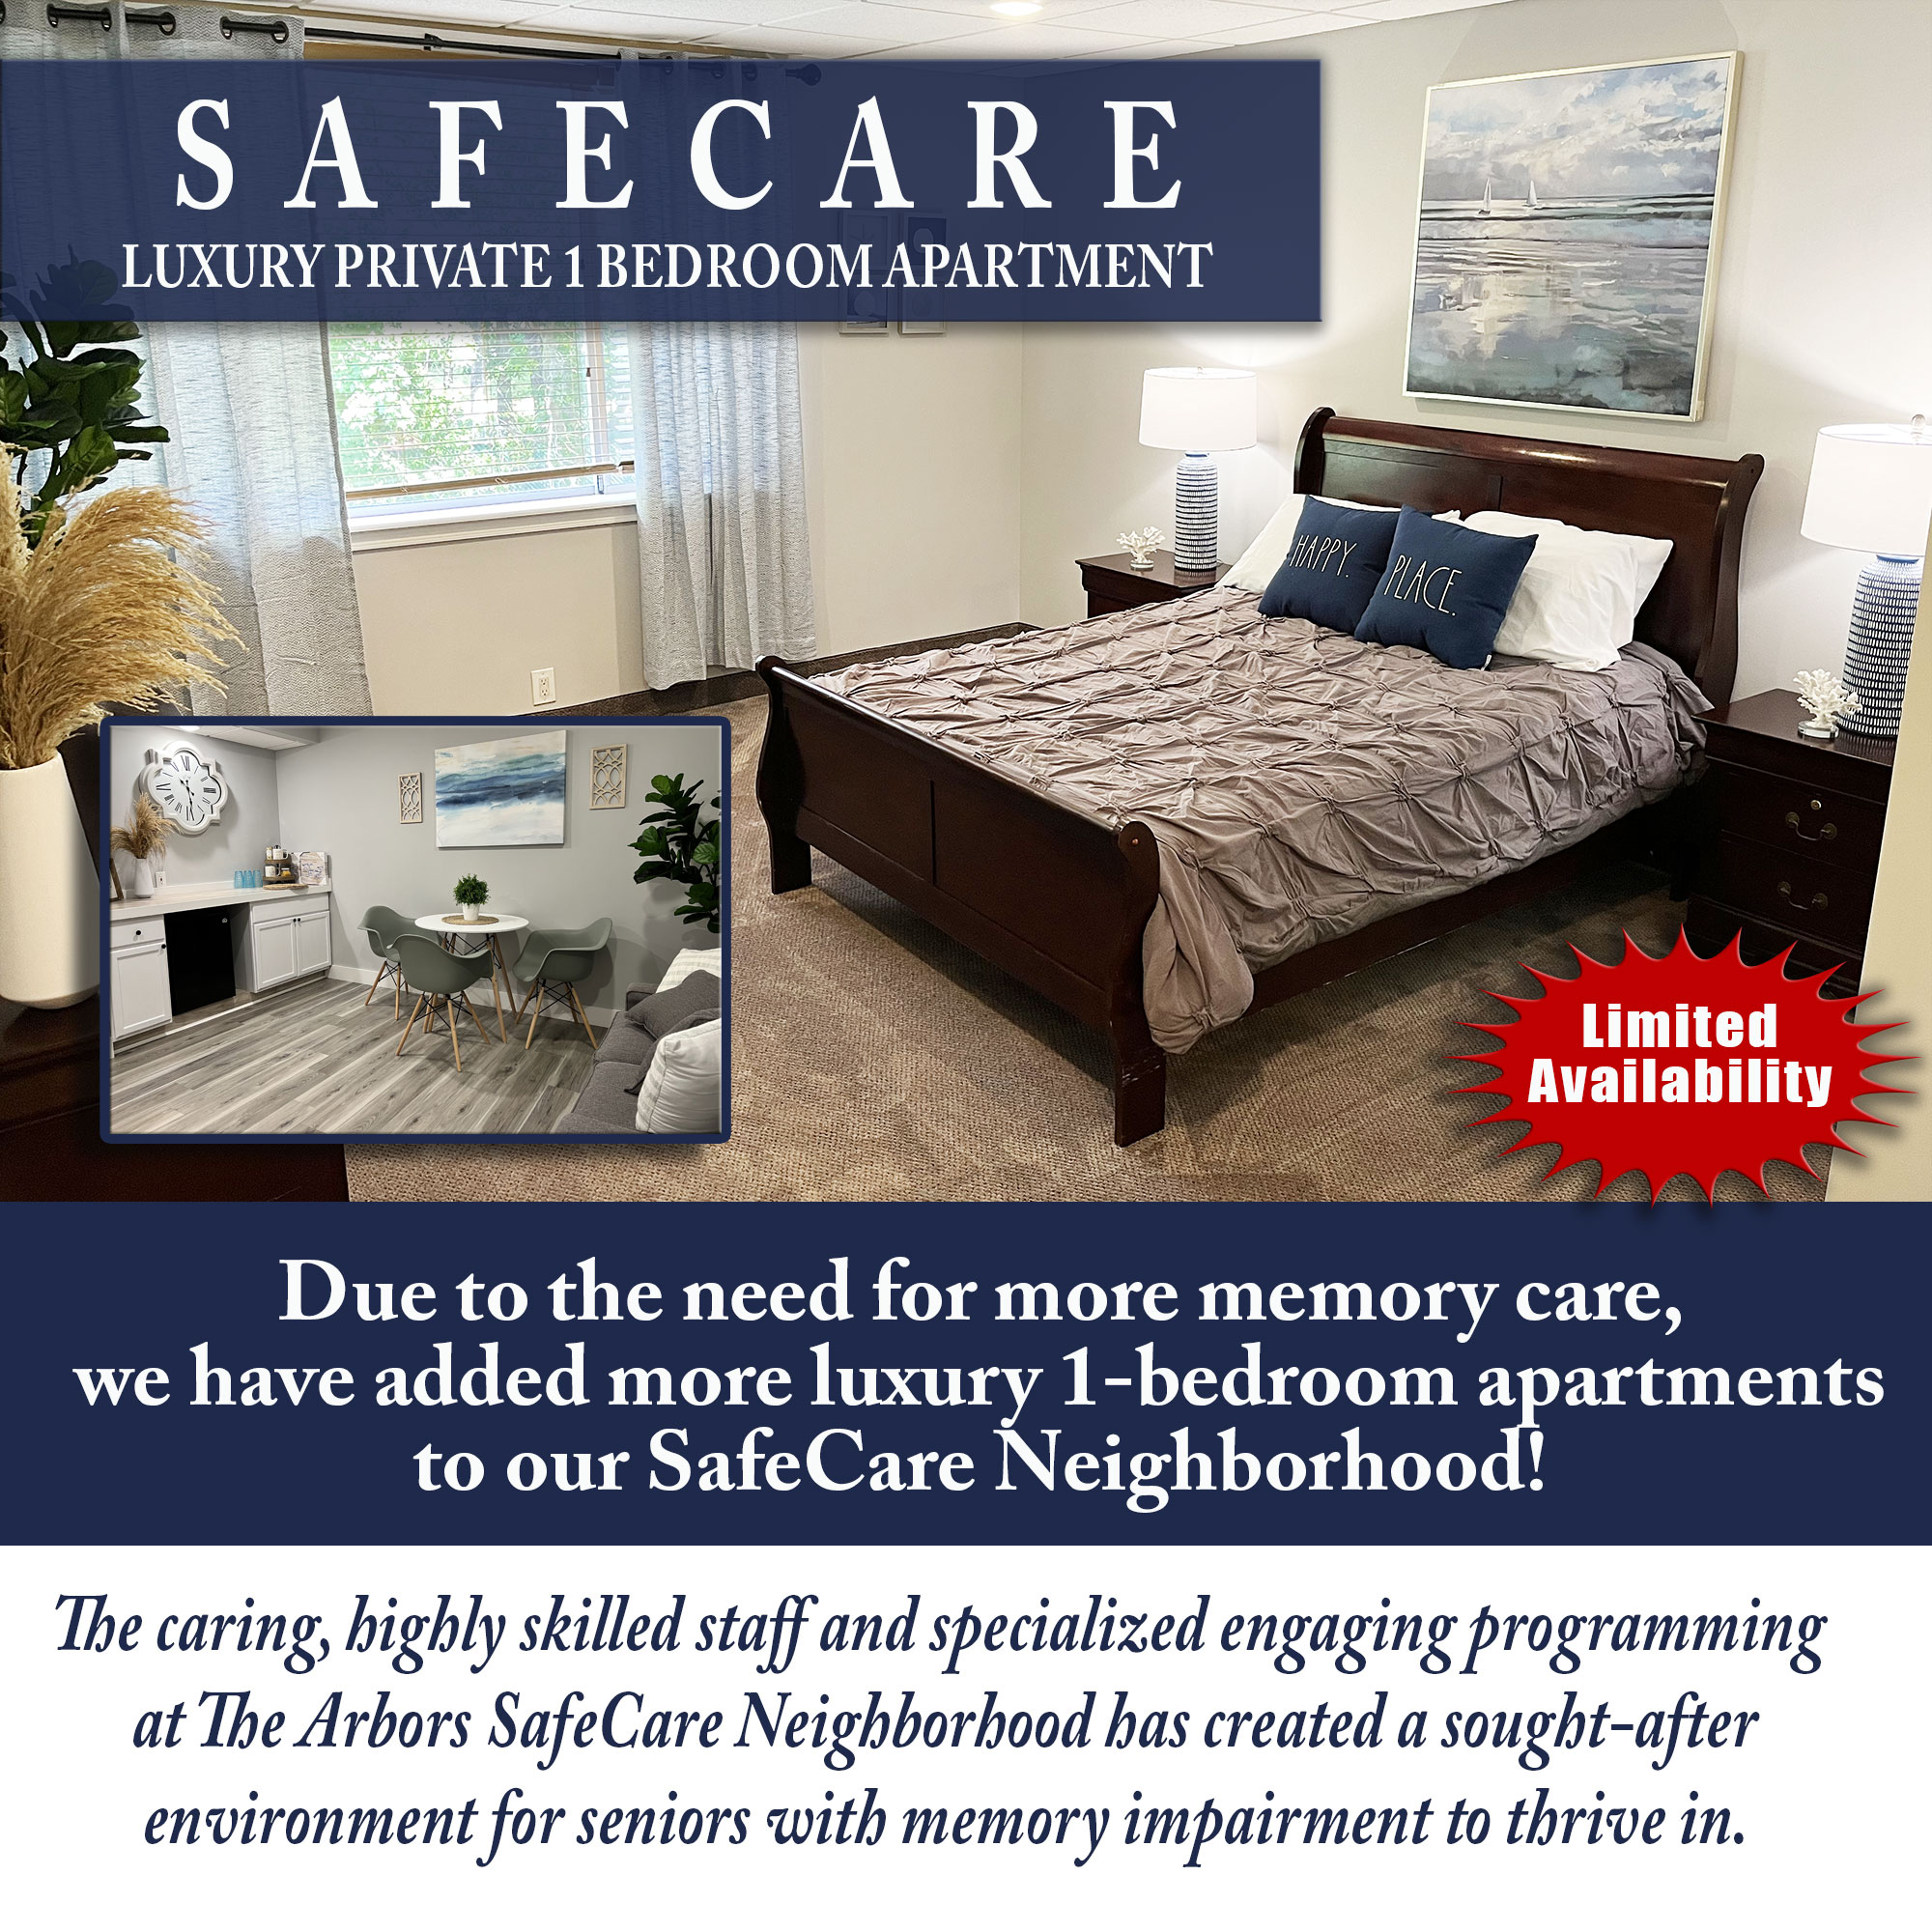 1 bedroom Apartments in SafeCare-456